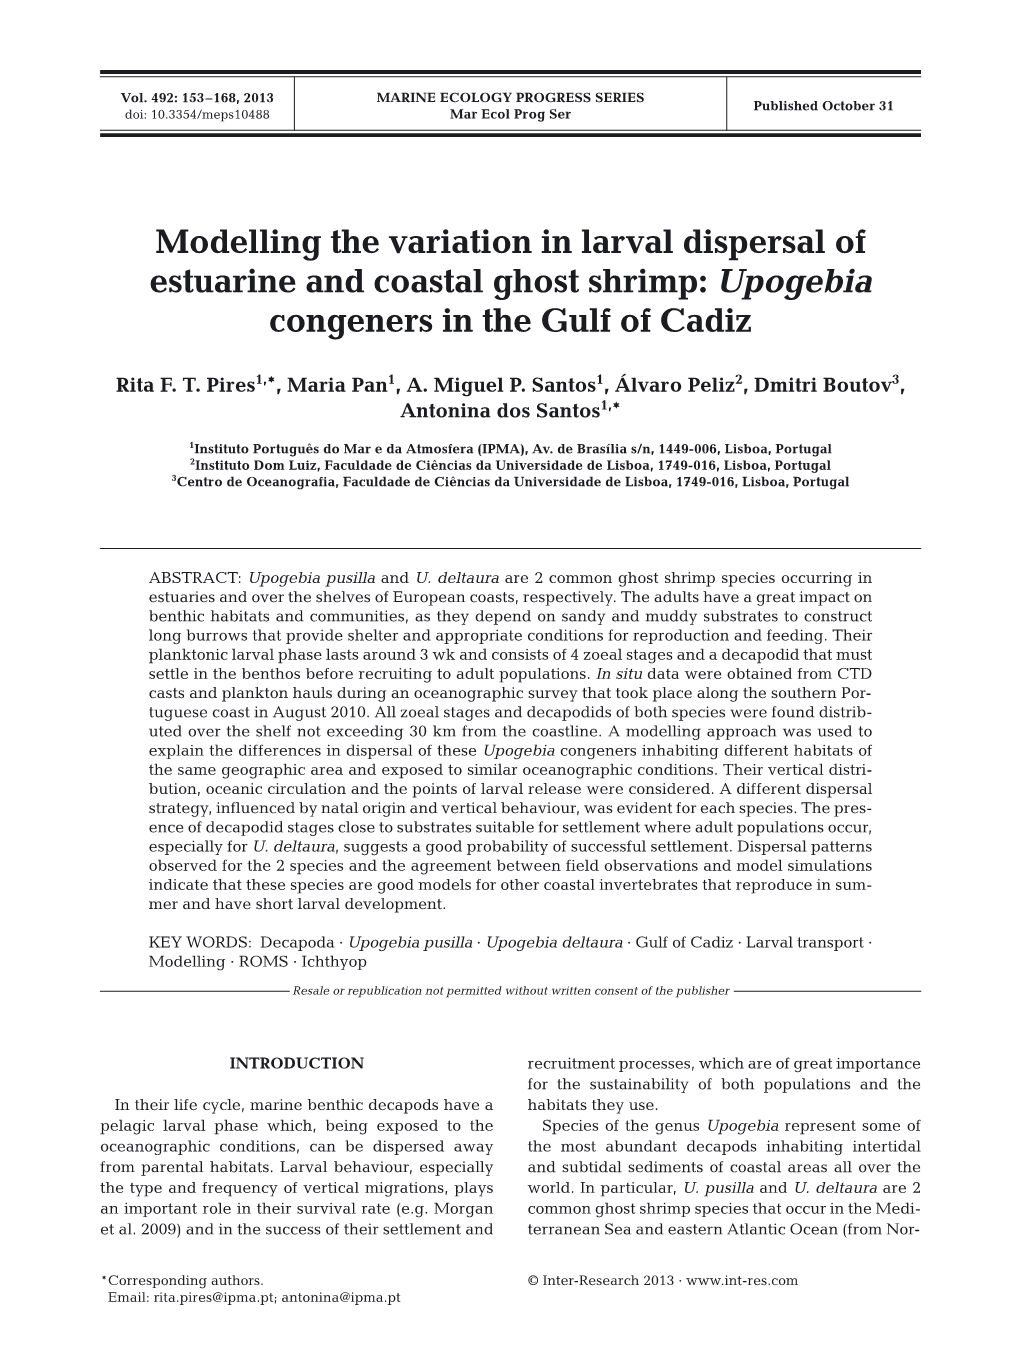 Modelling the Variation in Larval Dispersal of Estuarine and Coastal Ghost Shrimp: Upogebia Congeners in the Gulf of Cadiz